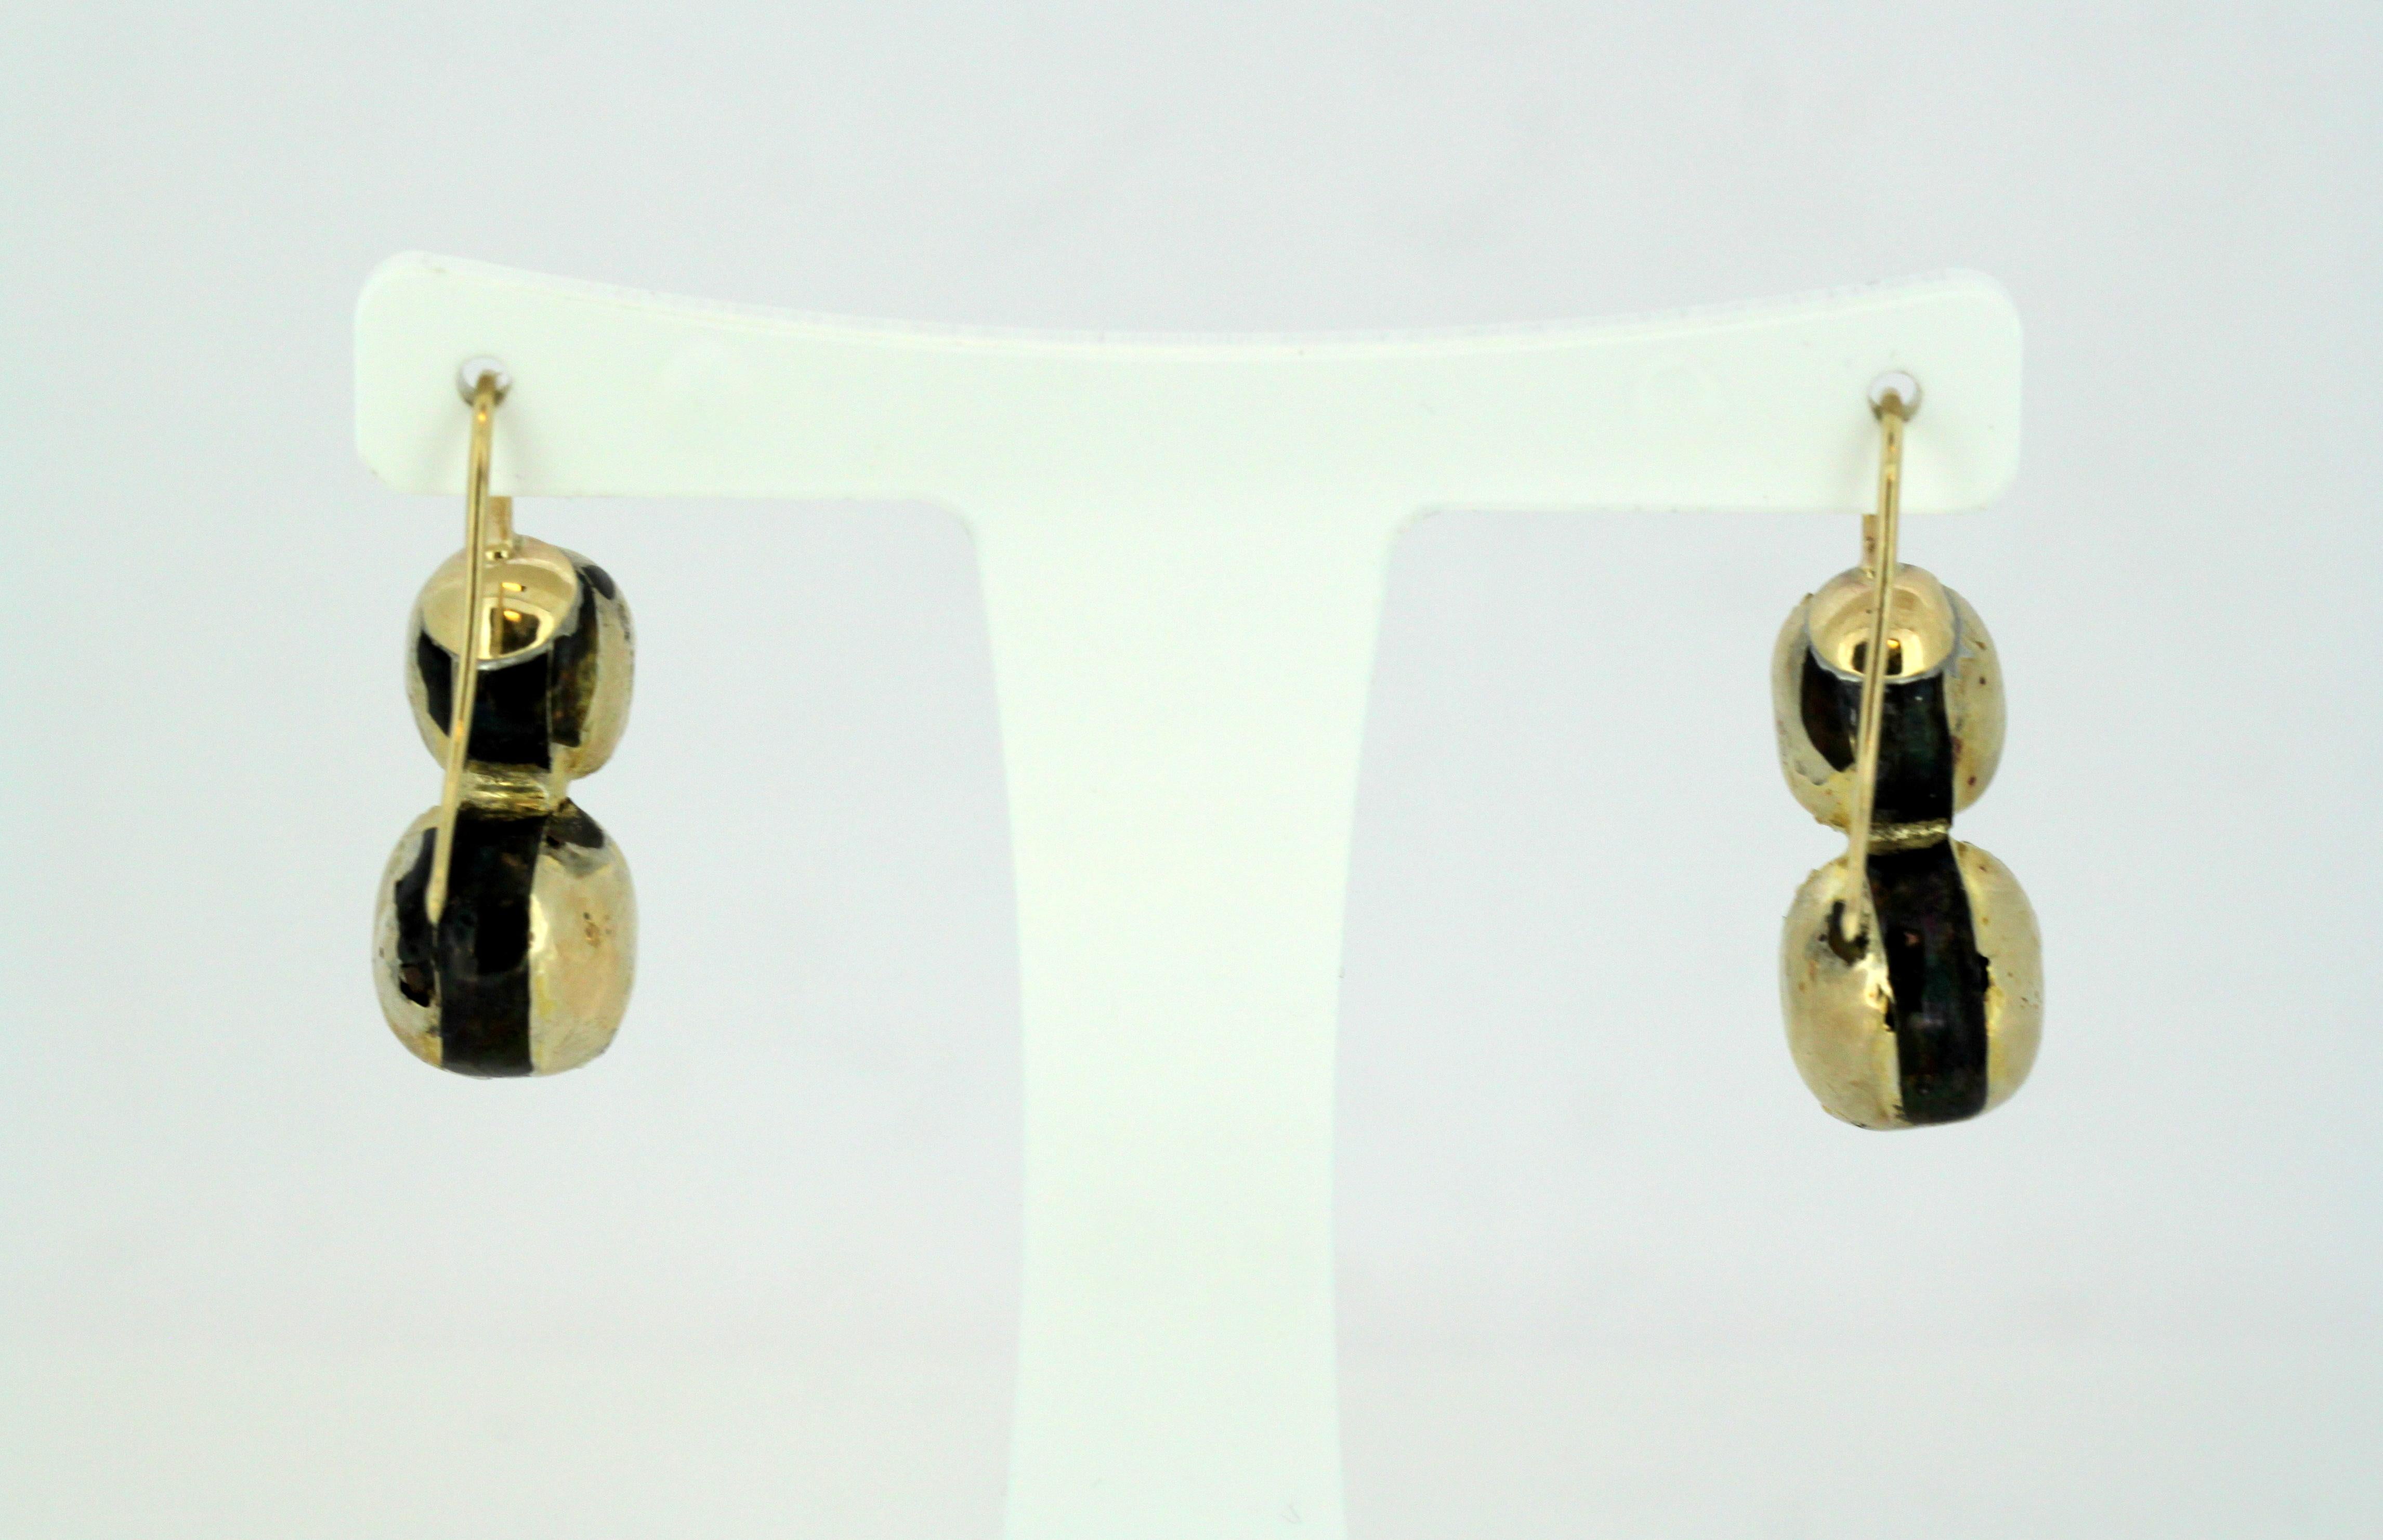 Antique Victorian 15 Karat Gold Earrings with Natural Citrine, 1850s 1